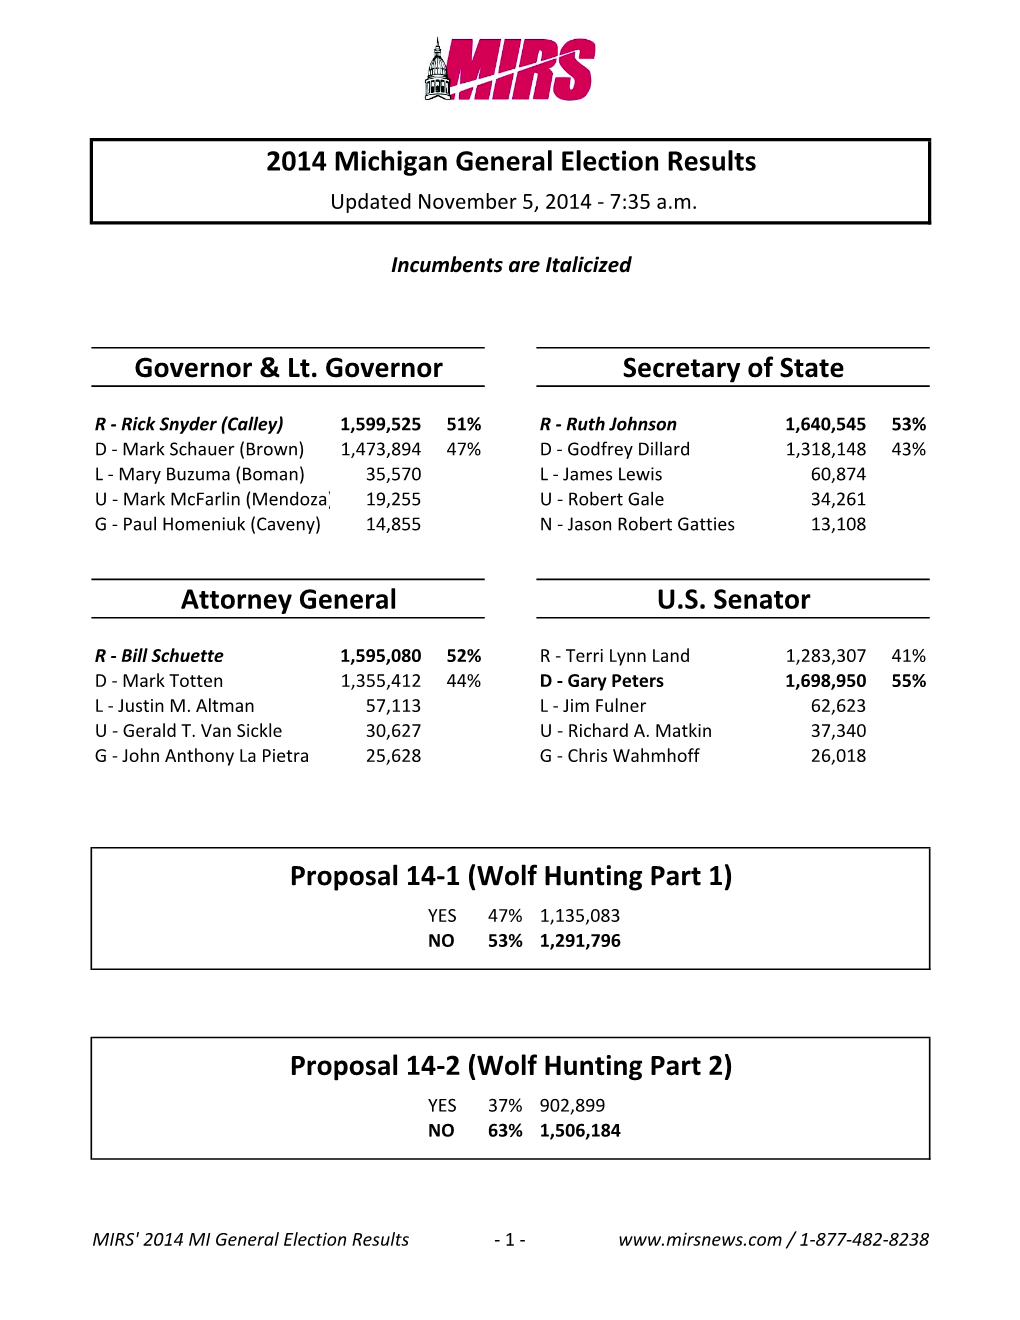 2014 Michigan General Election Results Governor & Lt. Governor